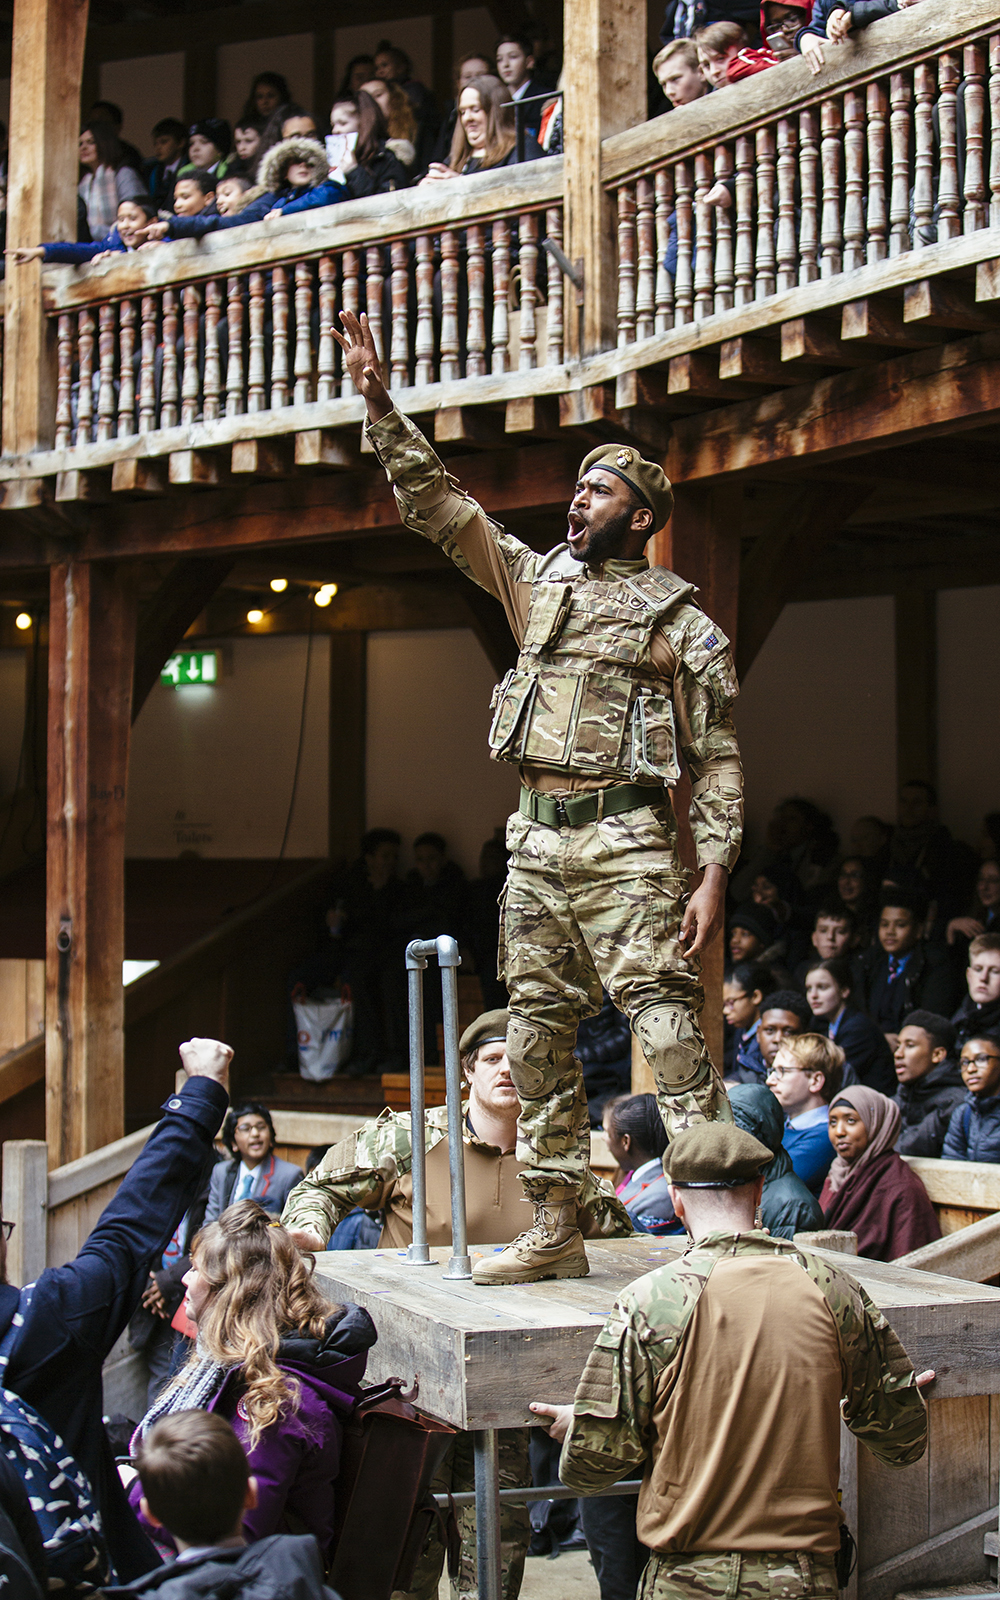 An actor dressed in modern military cameo uniform stands on a plinth in the Yard of the Globe Theatre, their arm outstretched pointing to the sky and shouting.